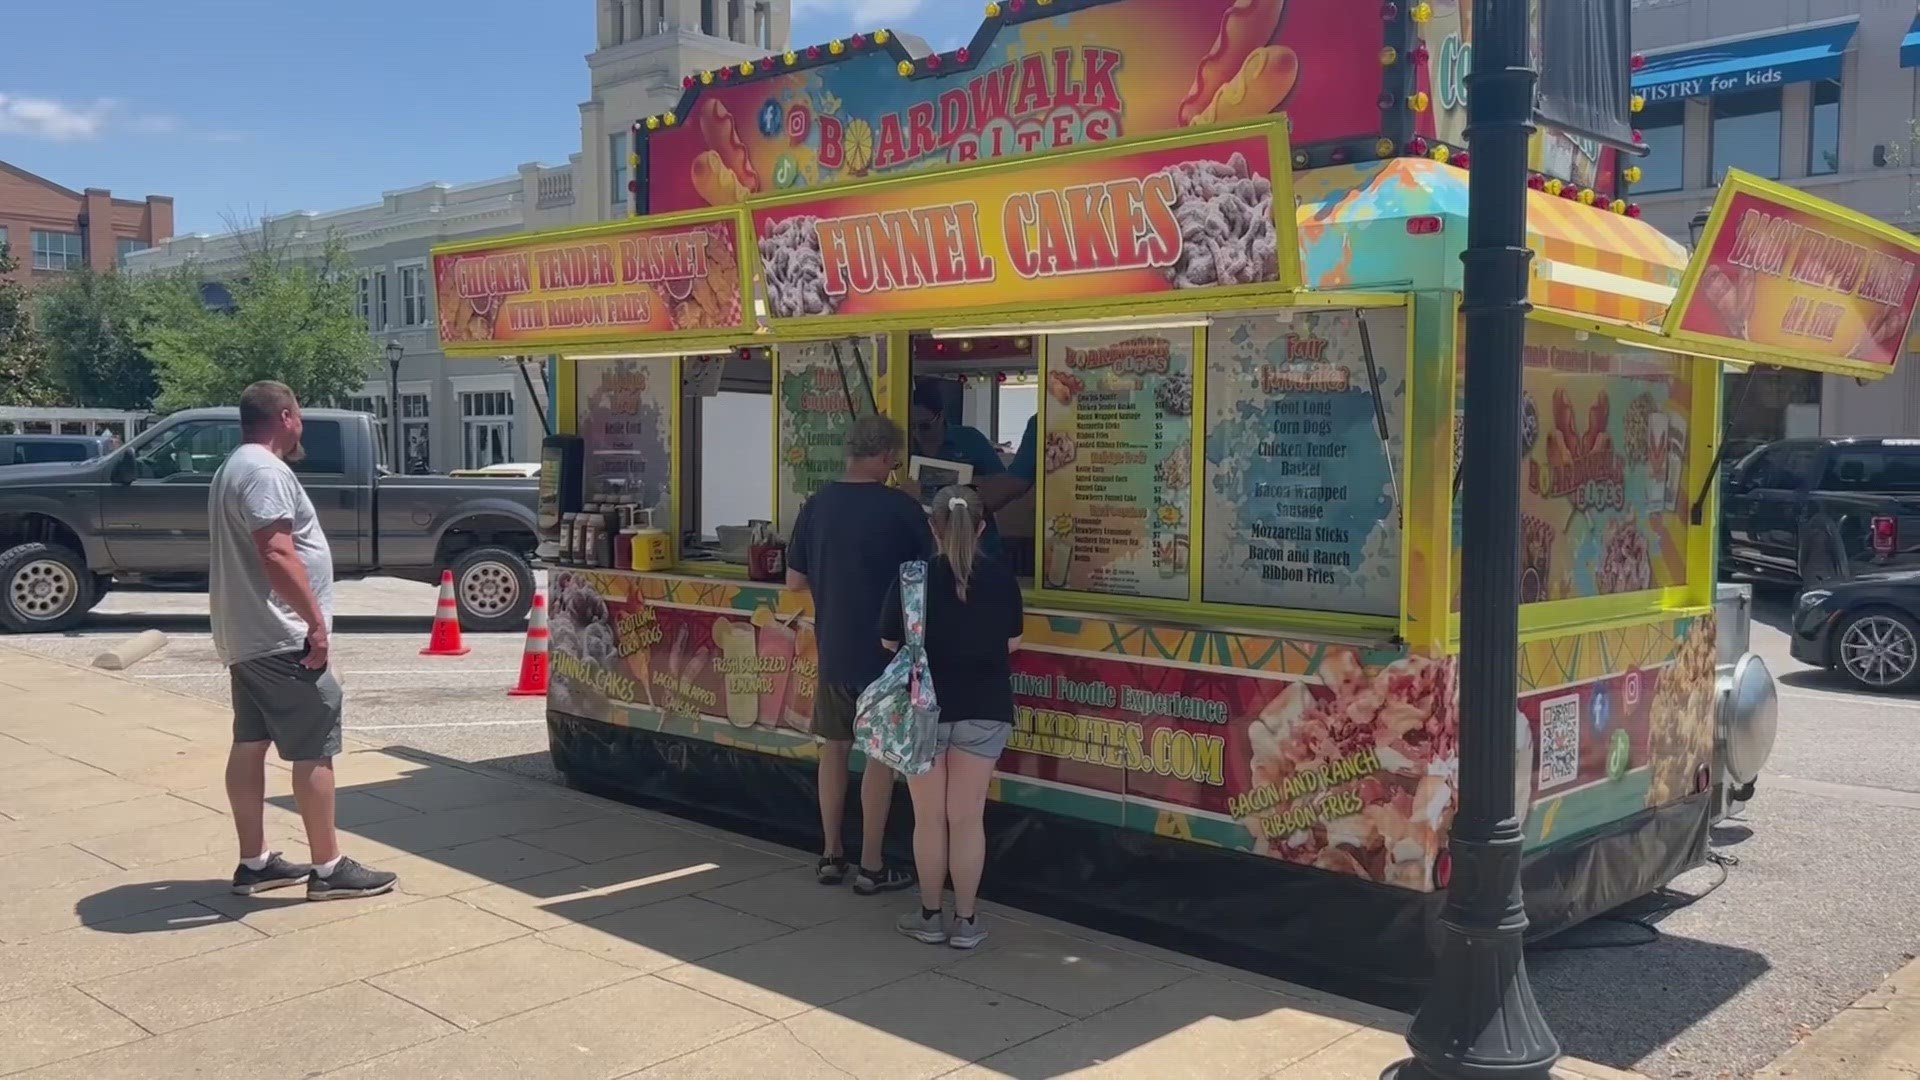 "Being shut down for an extended period of time is really not an option for us, or our employees," said Boardwalk Bites Food Truck owner Caitlin Pitalo.